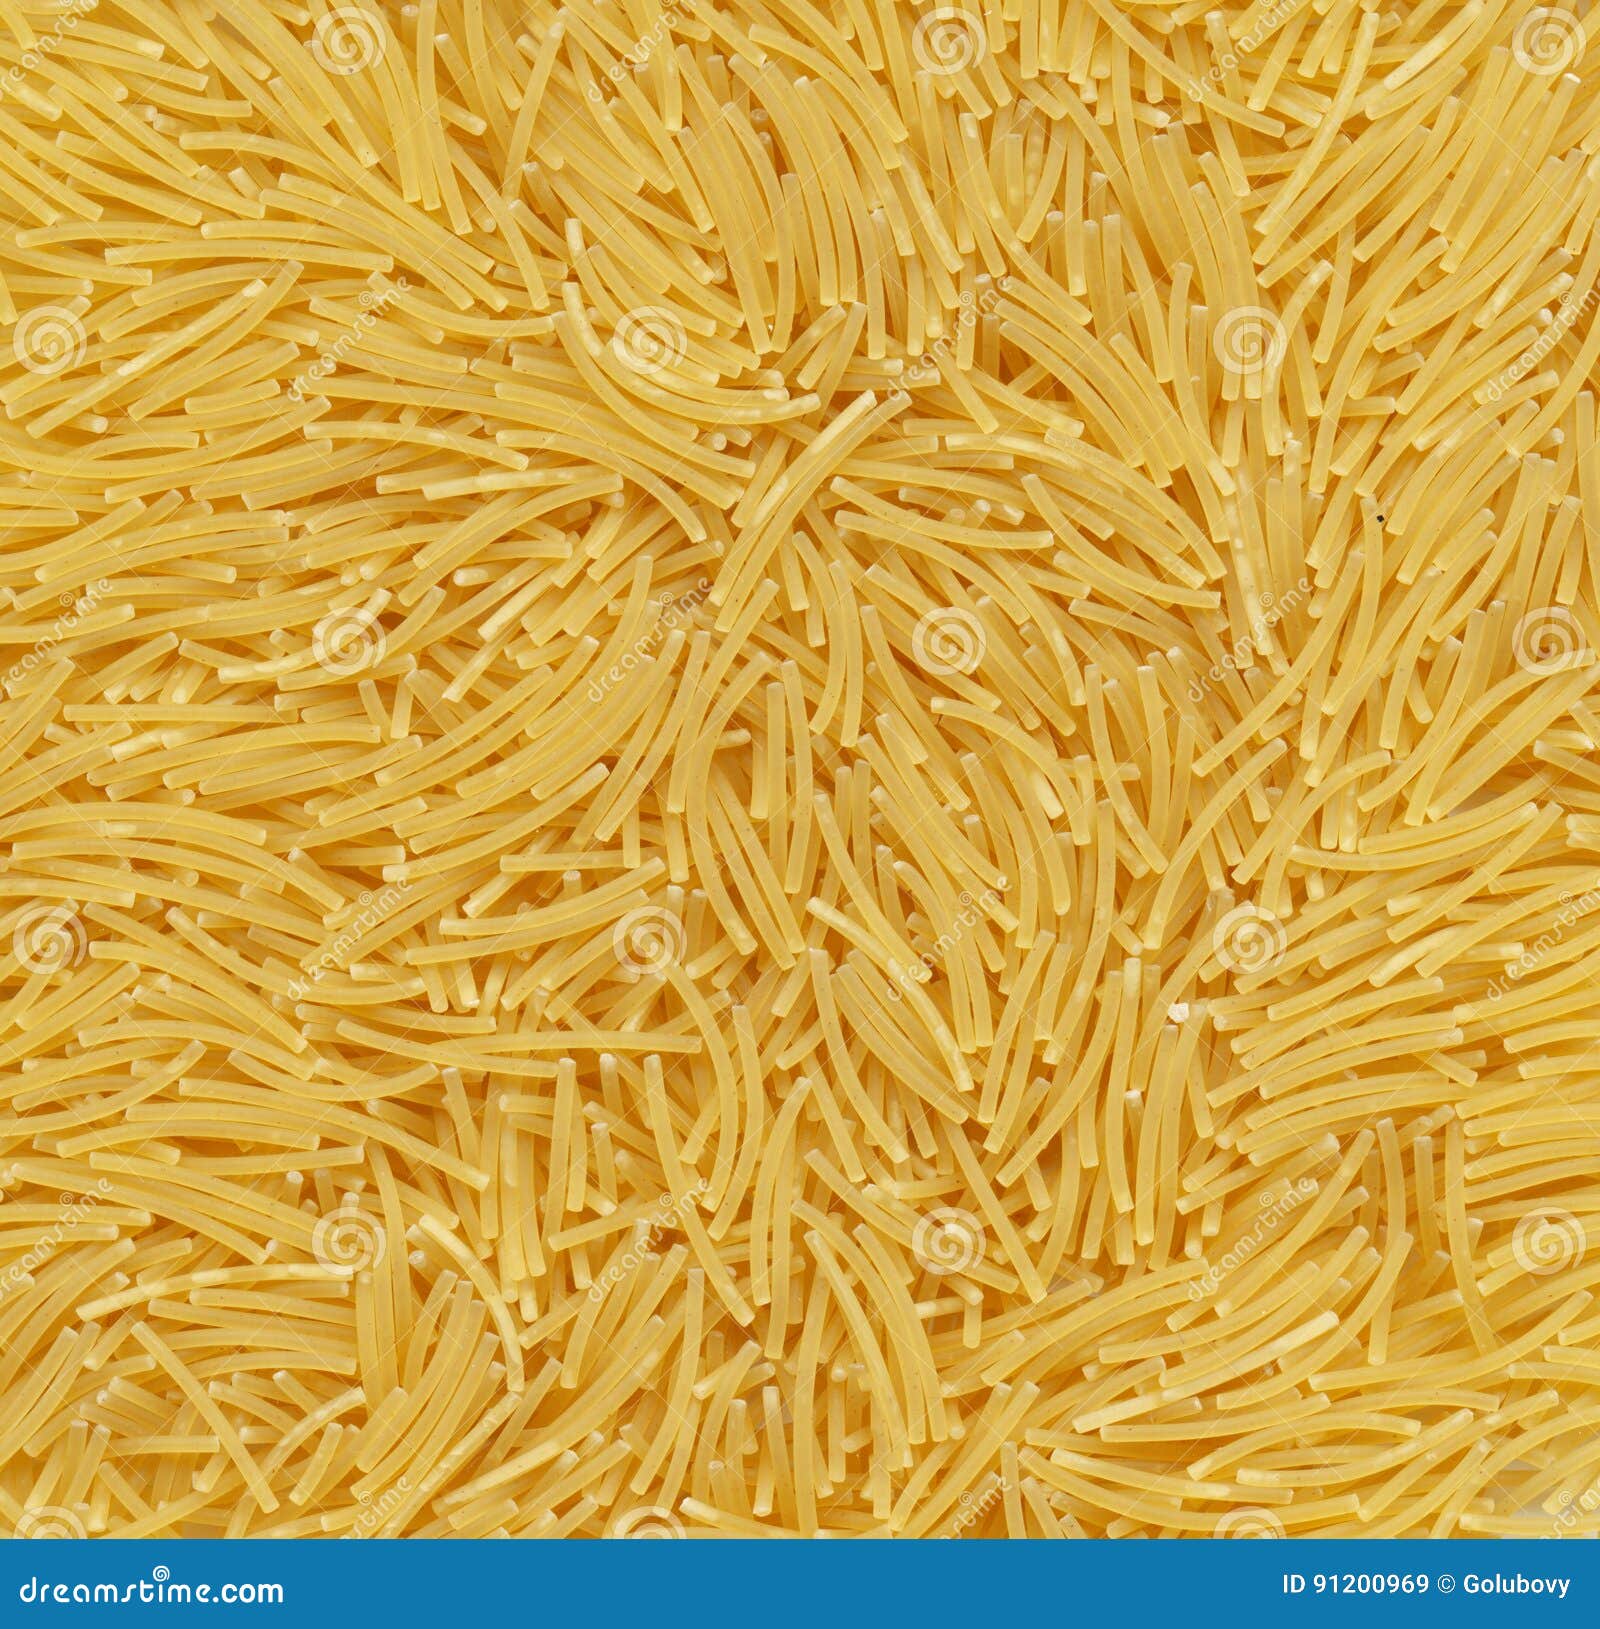 Download Short Yellow Italian Pasta Texture Closeup Stock Image Image Of Meal Pattern 91200969 Yellowimages Mockups